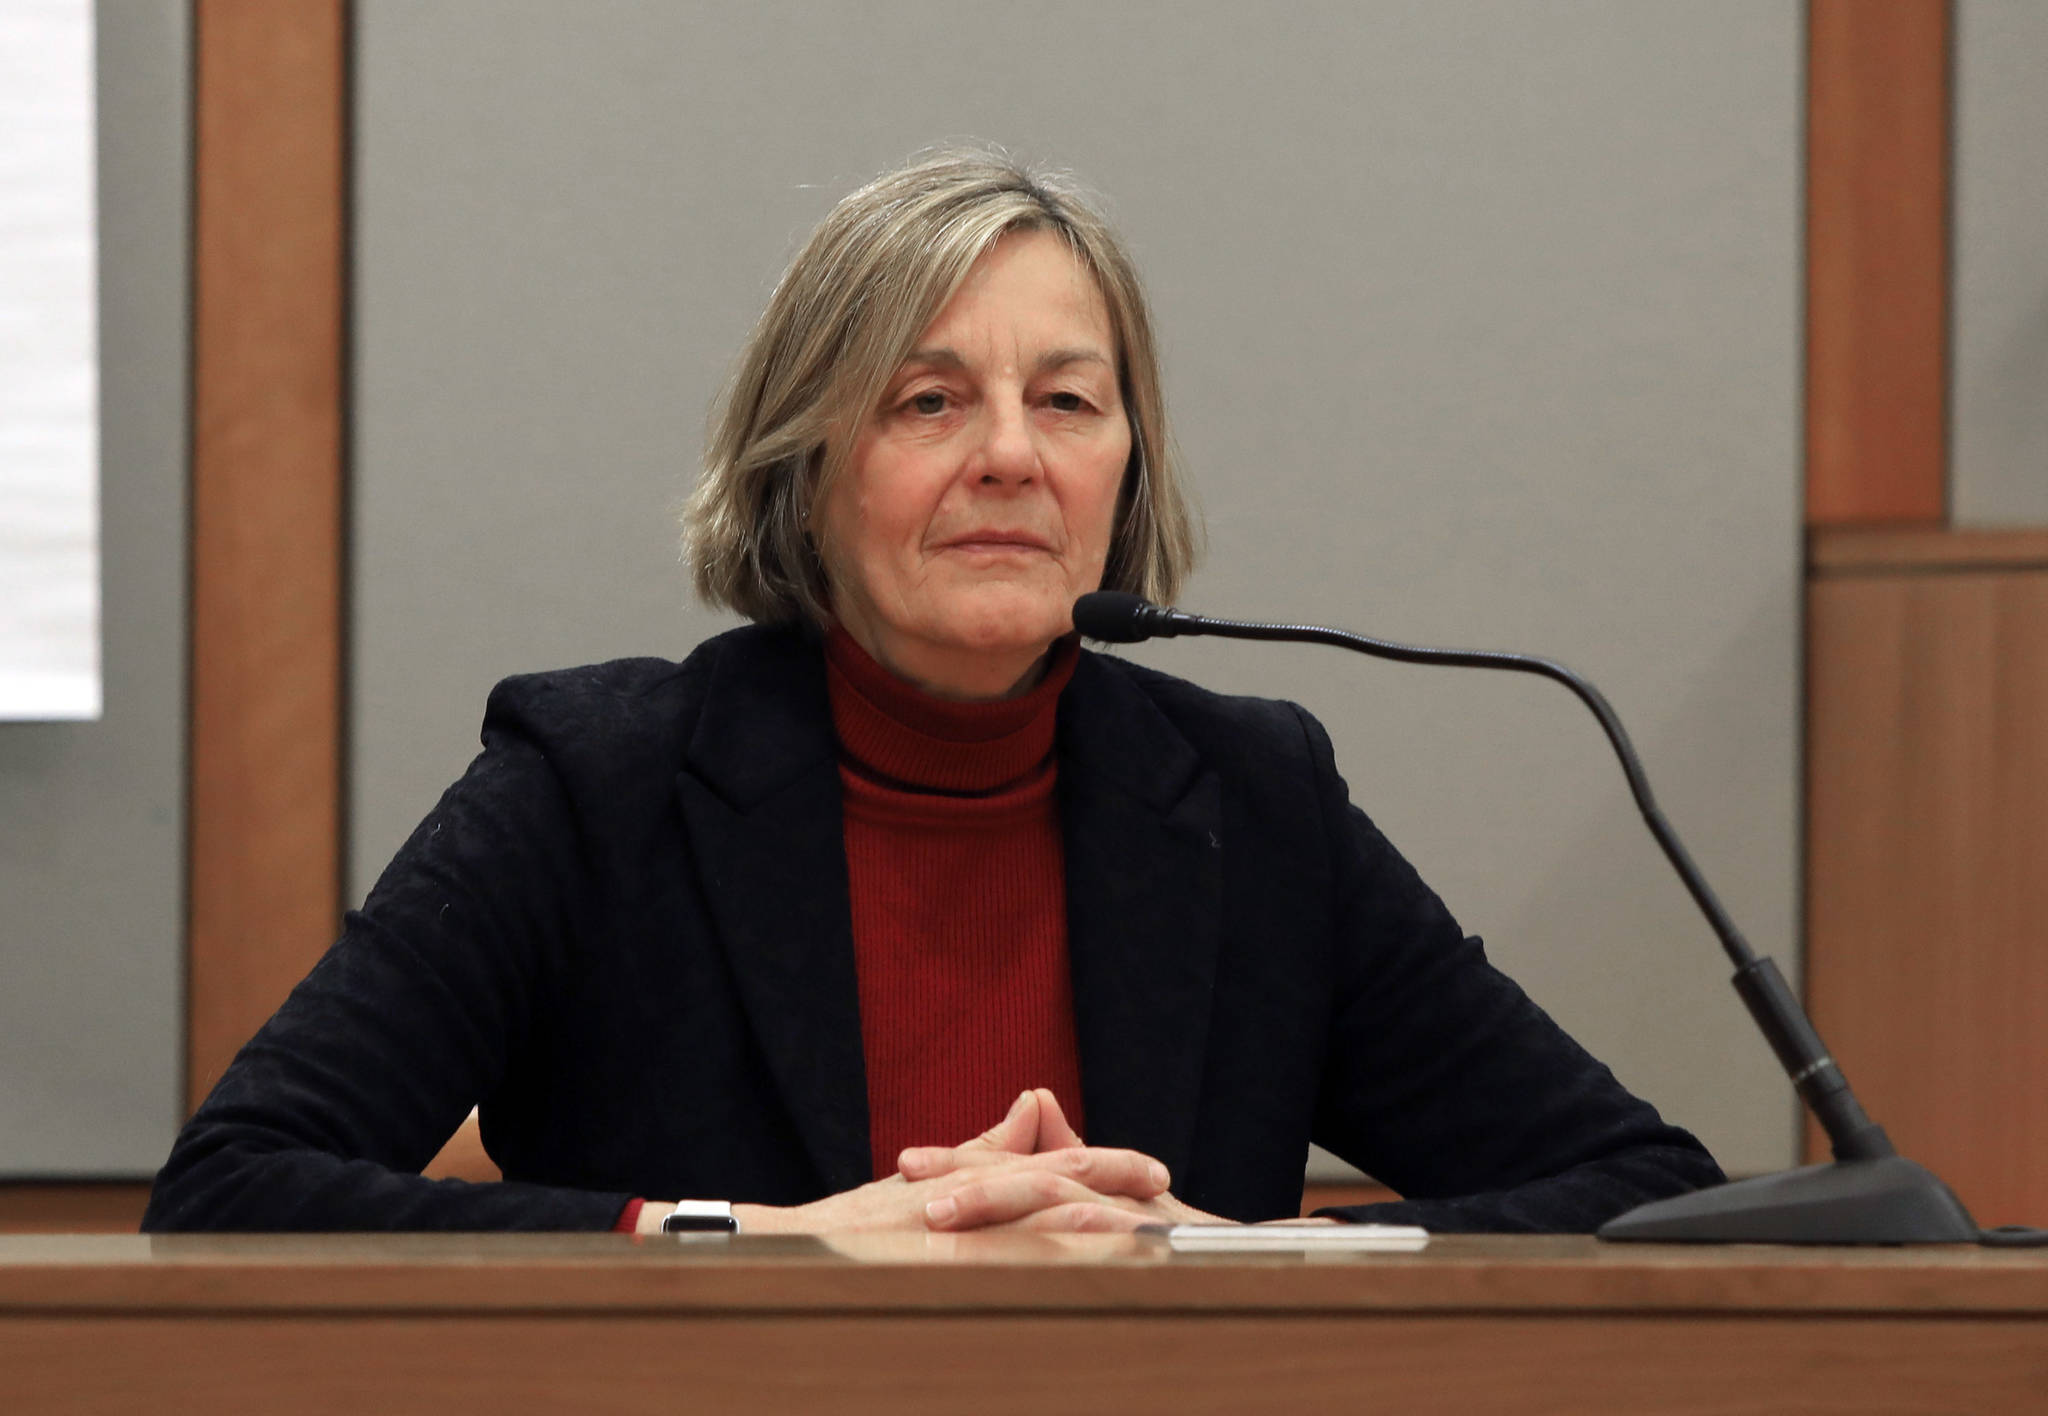 Kathryn Dodge, a candidate for an Alaska House of Representatives seat from Fairbanks, testifies in her lawsuit challenging results of a recount on Thursday, Dec. 20, 2018, in Anchorage, Alaska. The Alaska Supreme Court appointed Superior Court Judge Eric Aarseth as a special master to prepare a report on the appeal of a recount of in the race between Dodge, a Democrat, and Republican Bart LeBon. LeBon held a one-vote lead after the recount. (AP Photo/Dan Joling)